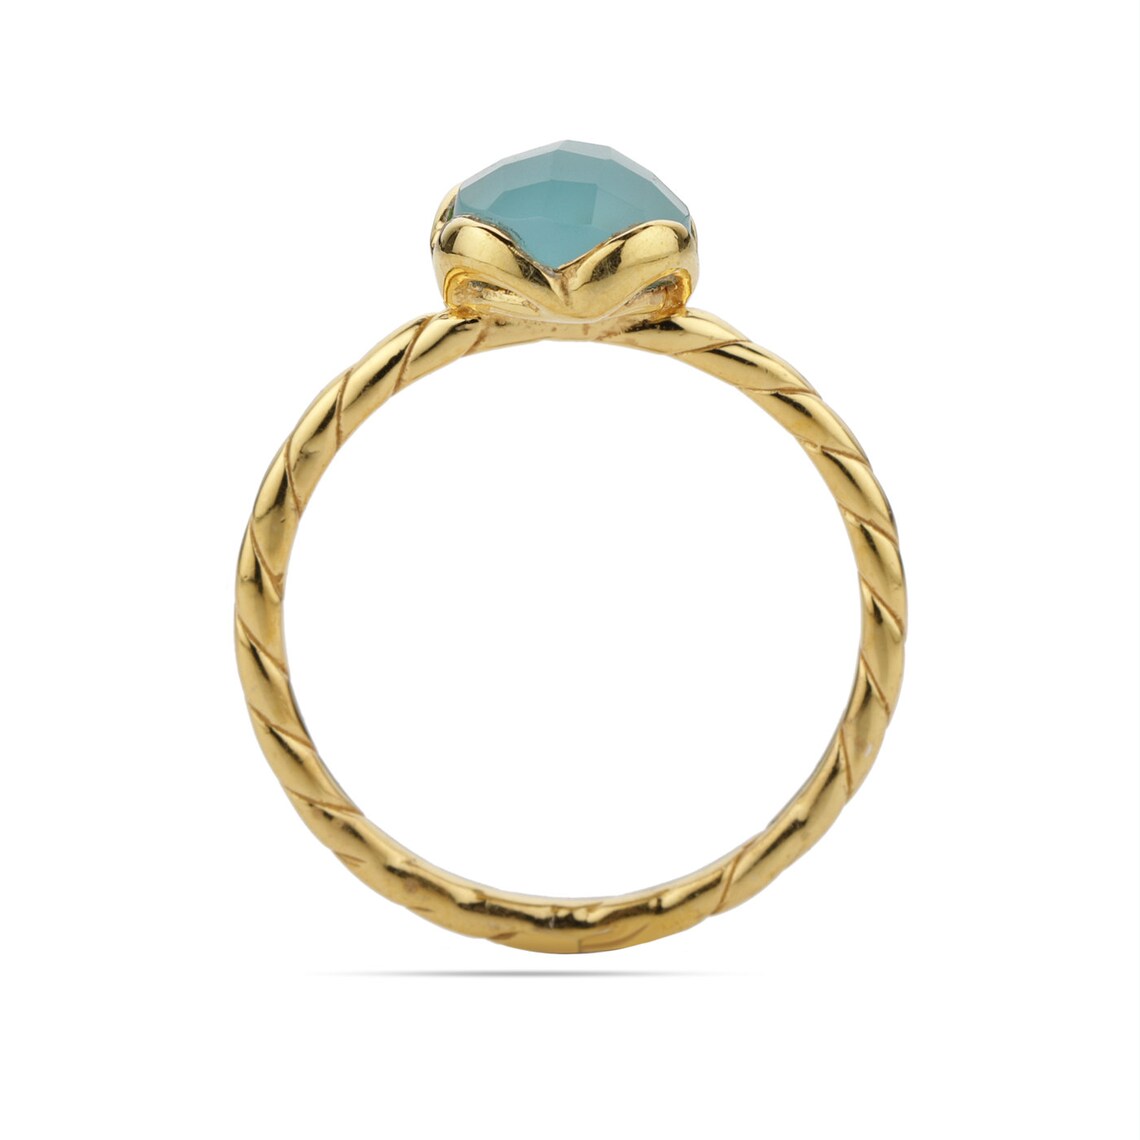 Blue Chalcedony Gold Ring - Aqua Chalcedony Gemstone Ring - Twisted Band Ring